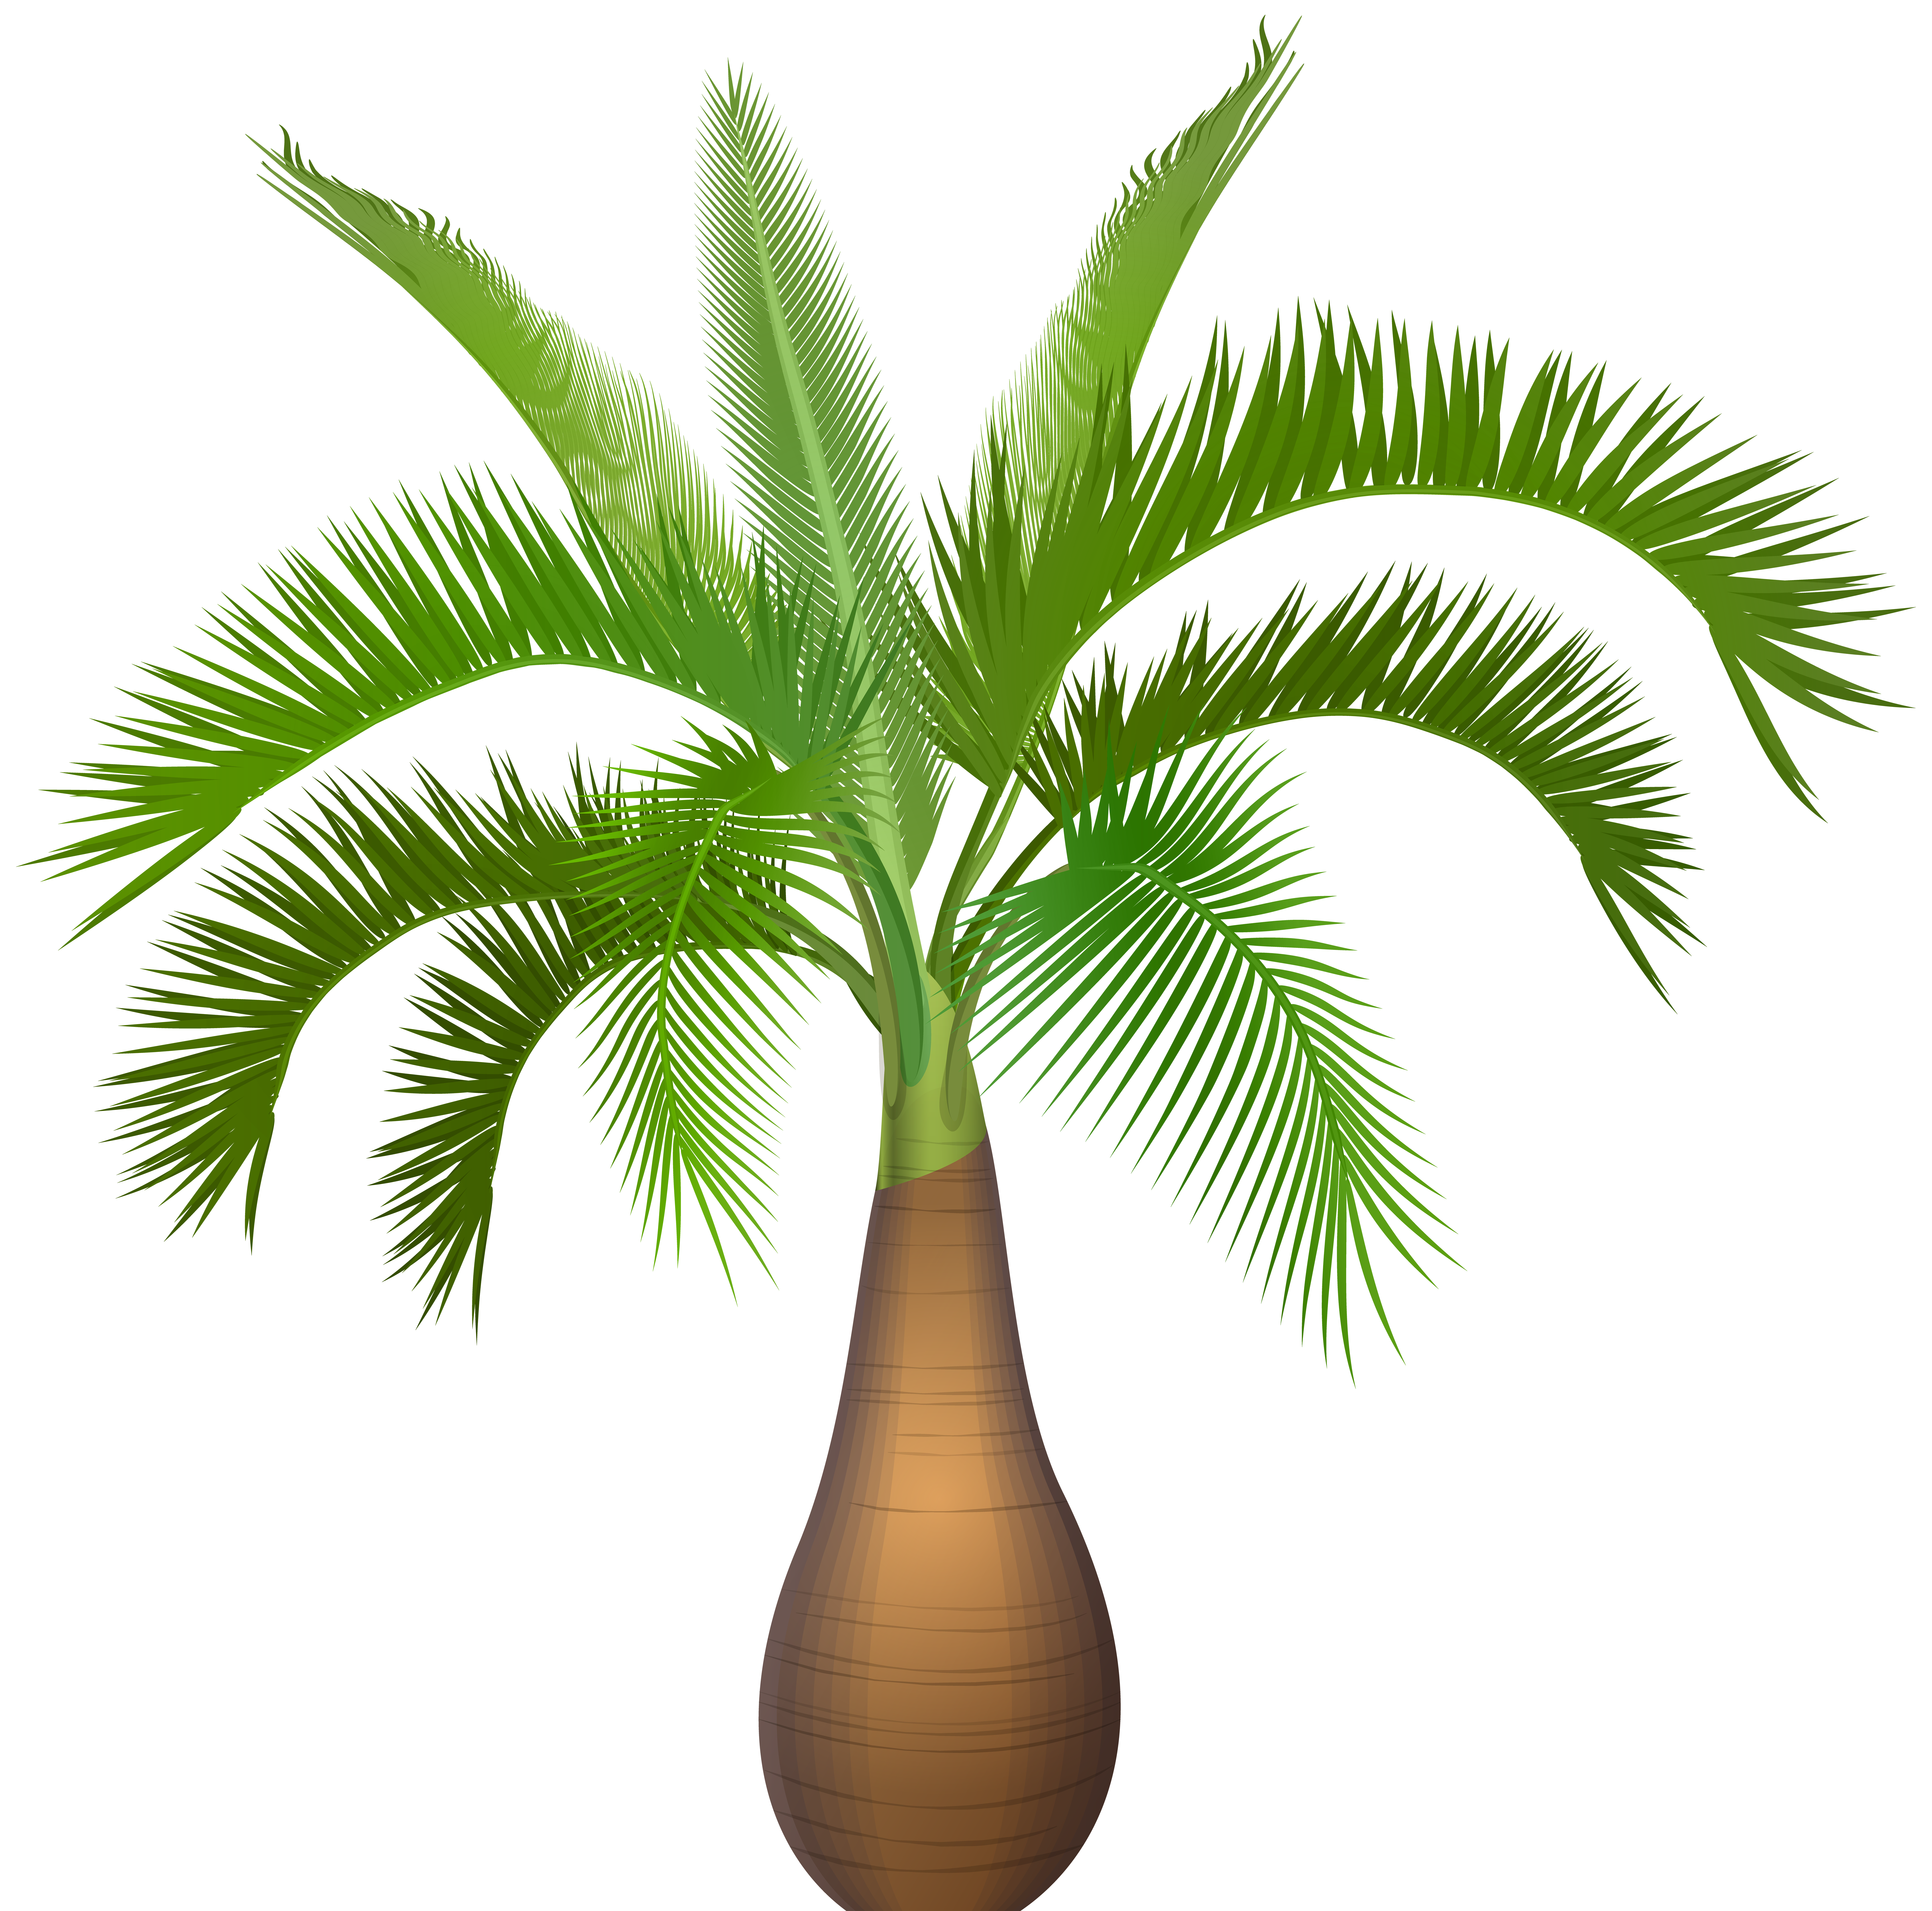 palm clipart cool